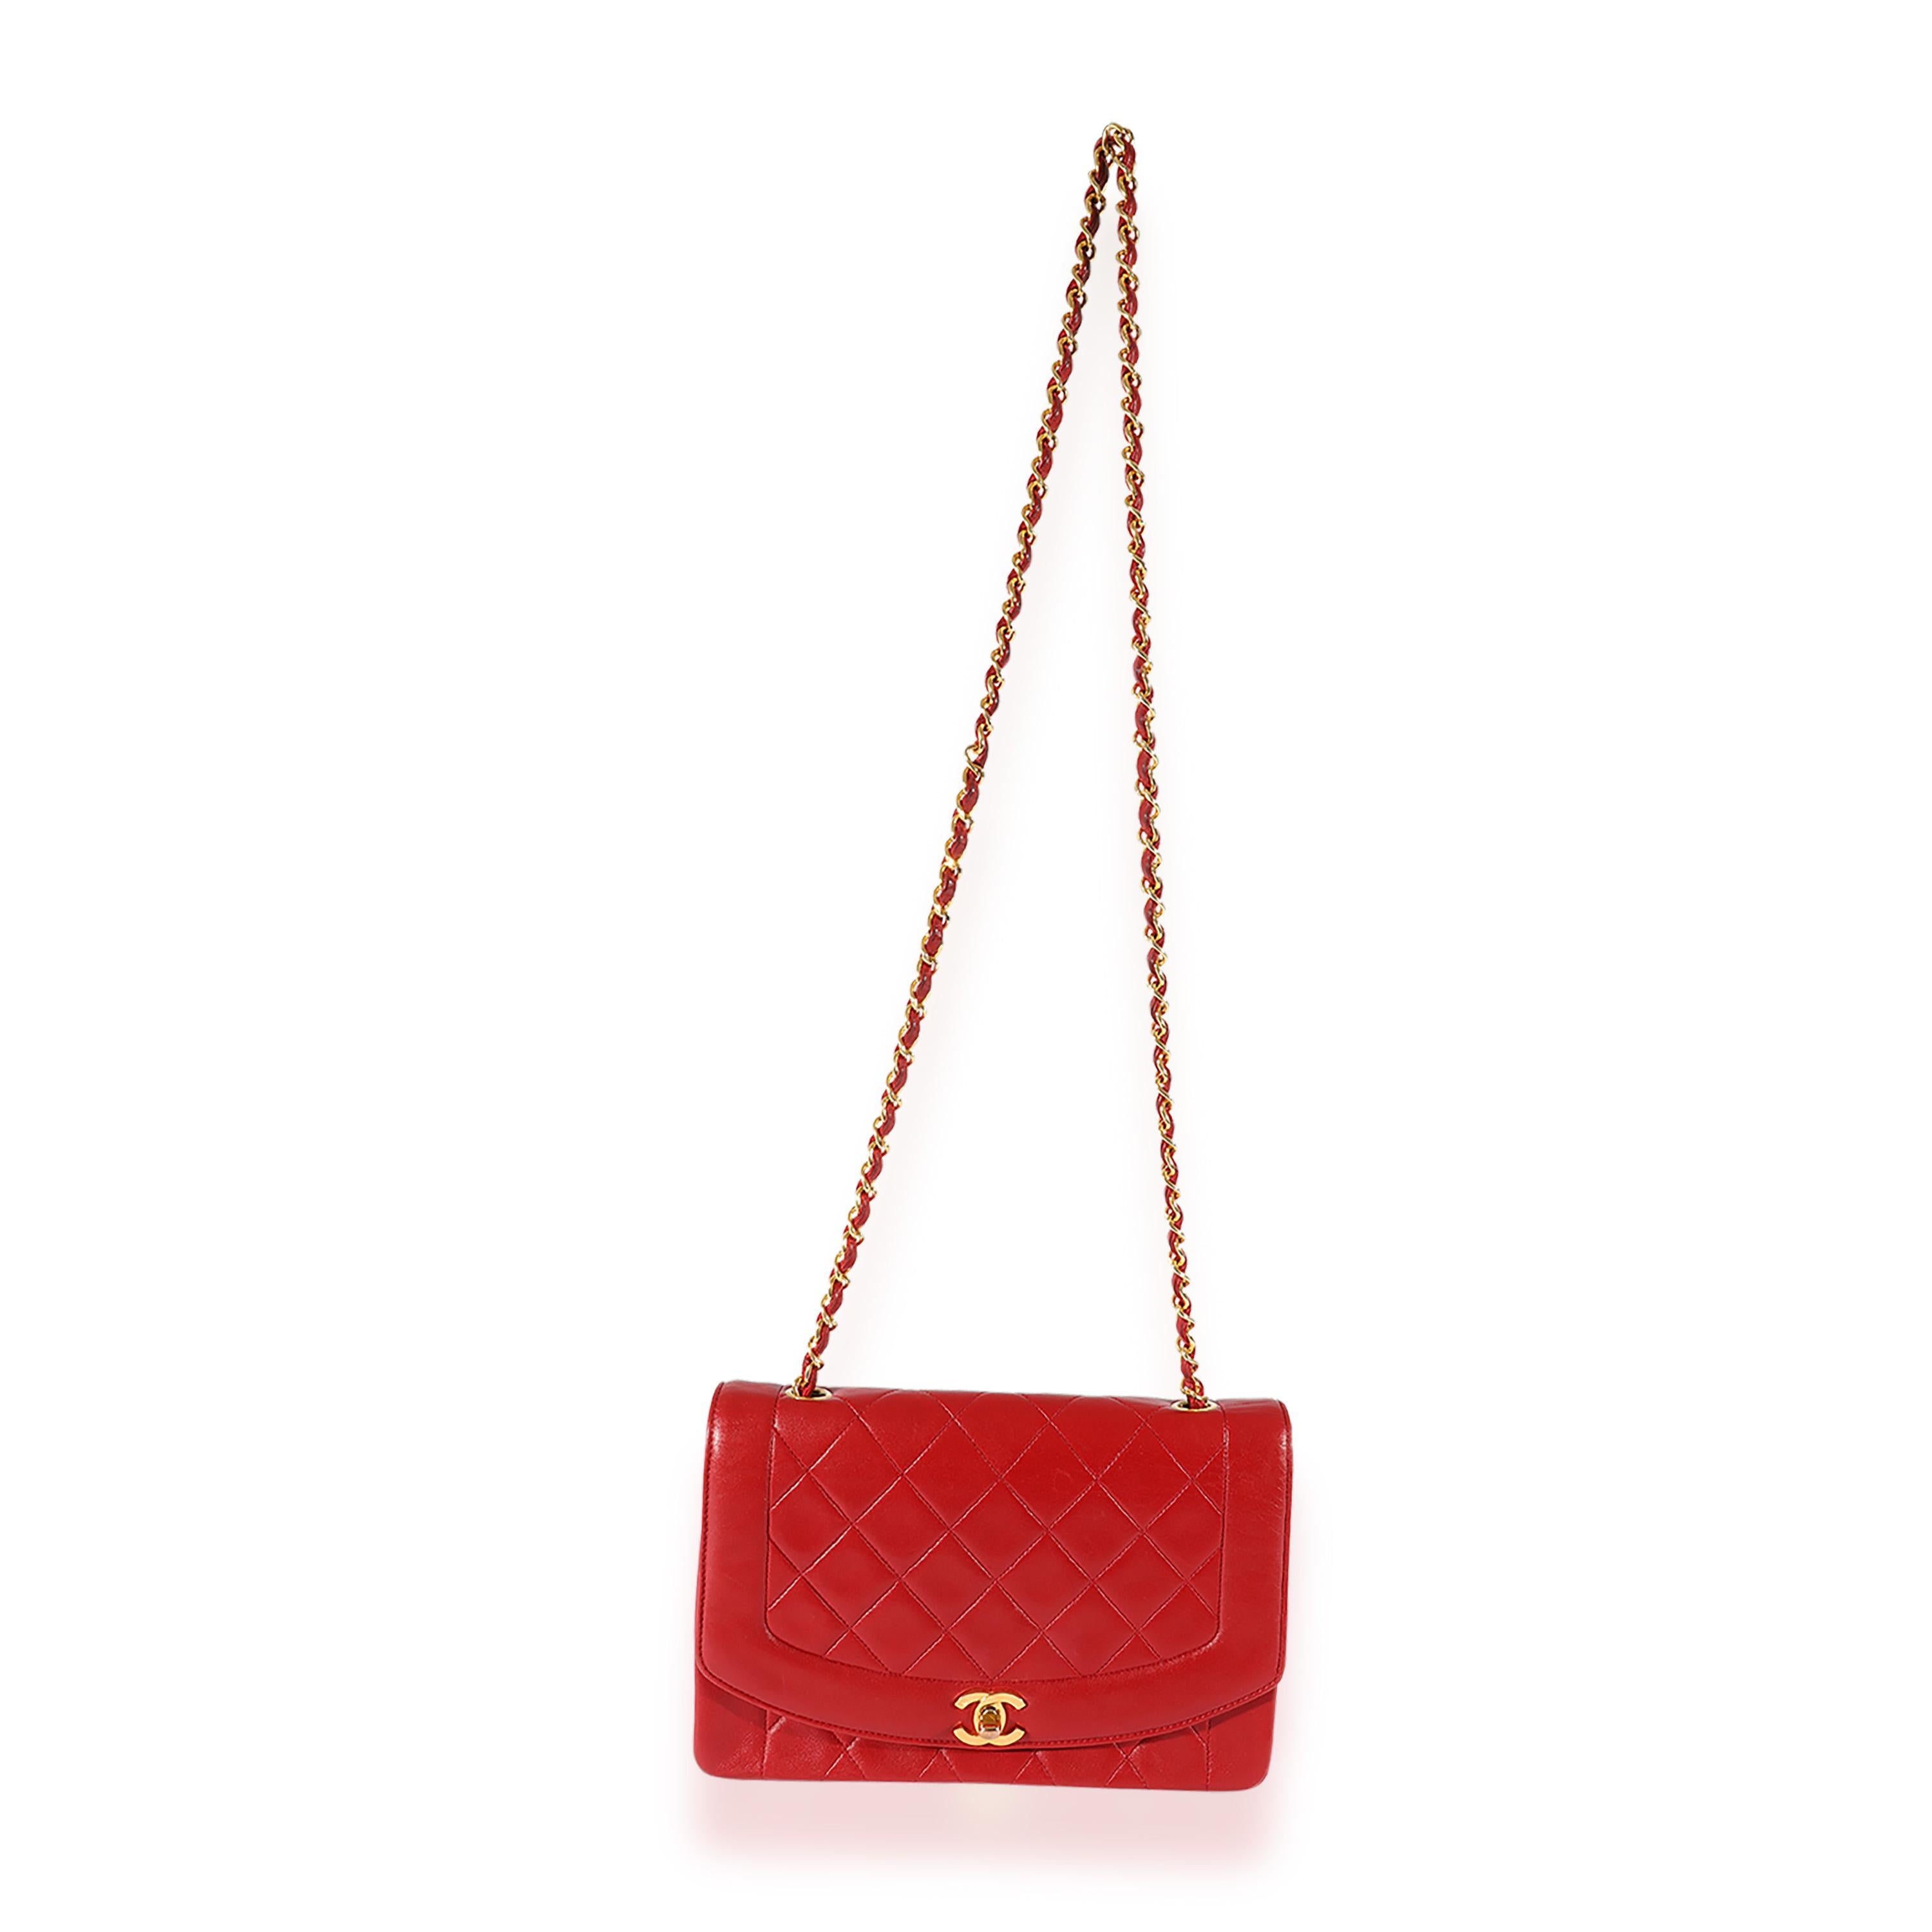 Listing Title: Chanel Vintage Red Quilted Lambskin Diana Flap Bag
SKU: 125366
Condition: Pre-owned 
Handbag Condition: Good
Condition Comments: Good Condition. Scuffing to corners and exterior. Discoloration to base. Creasing throughout leather.